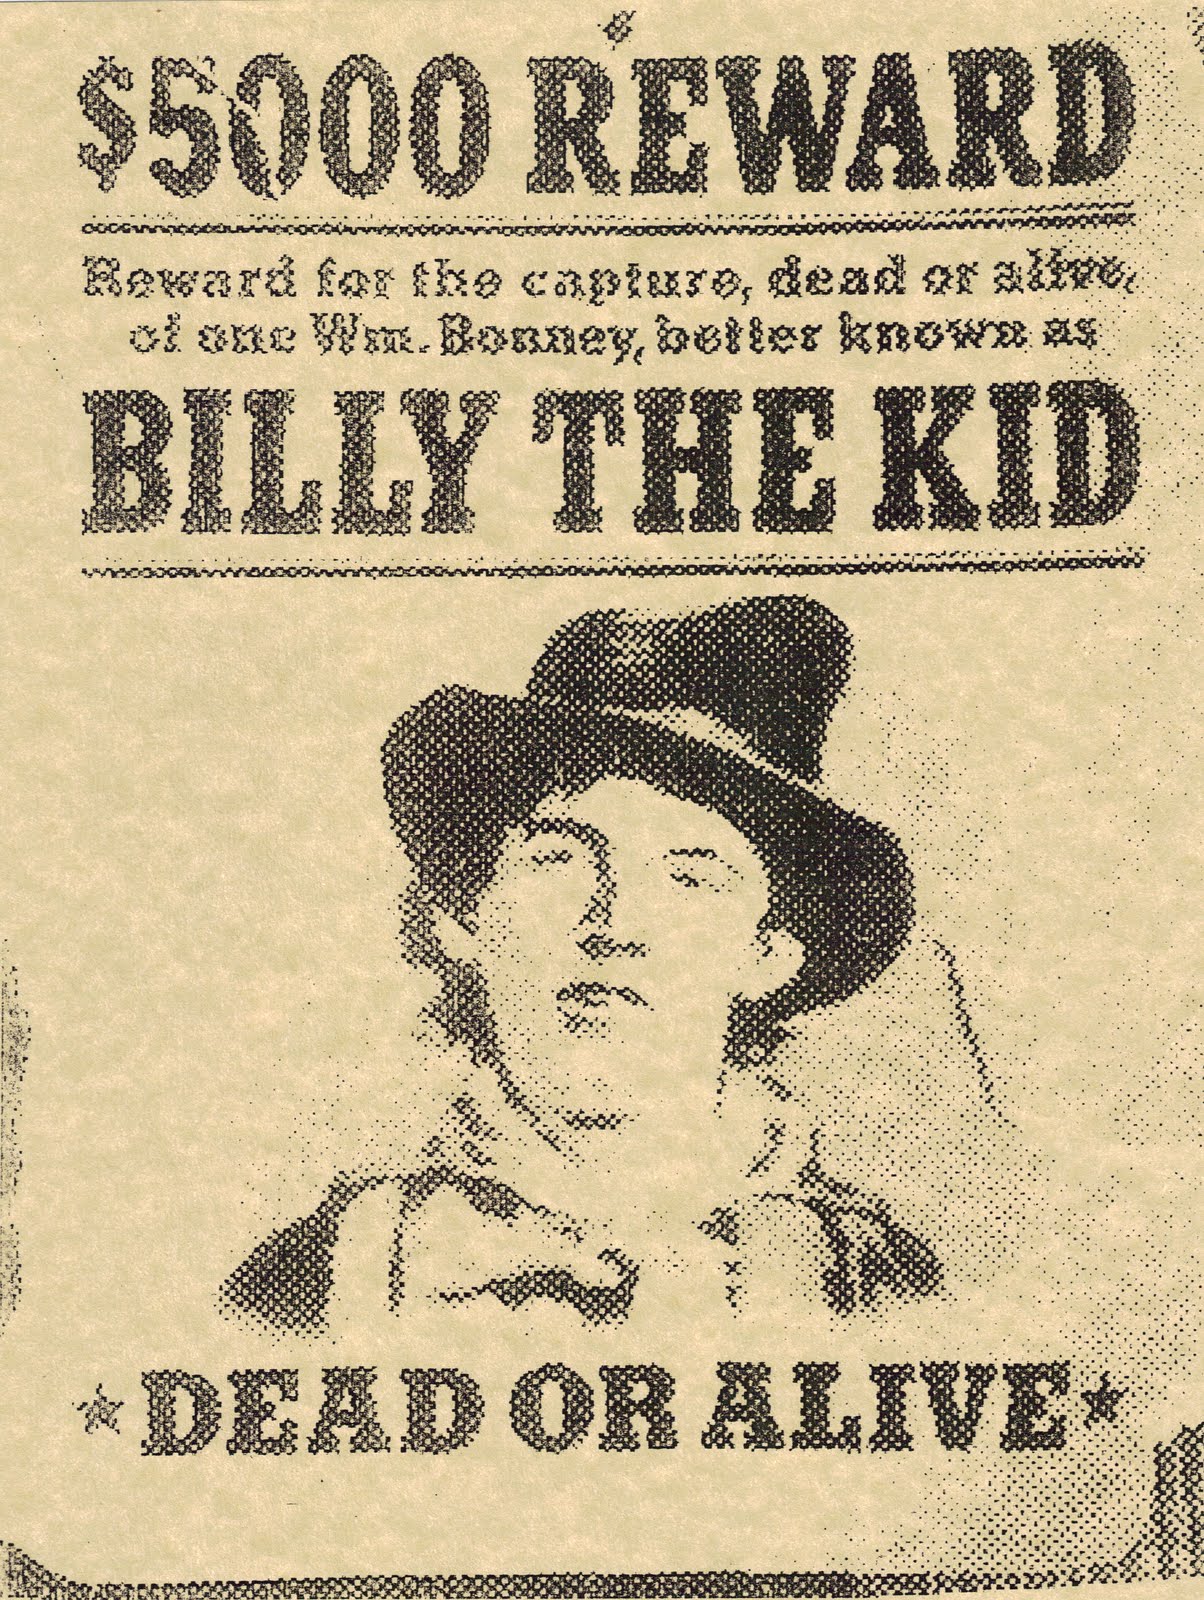 wanted dead or
              alive